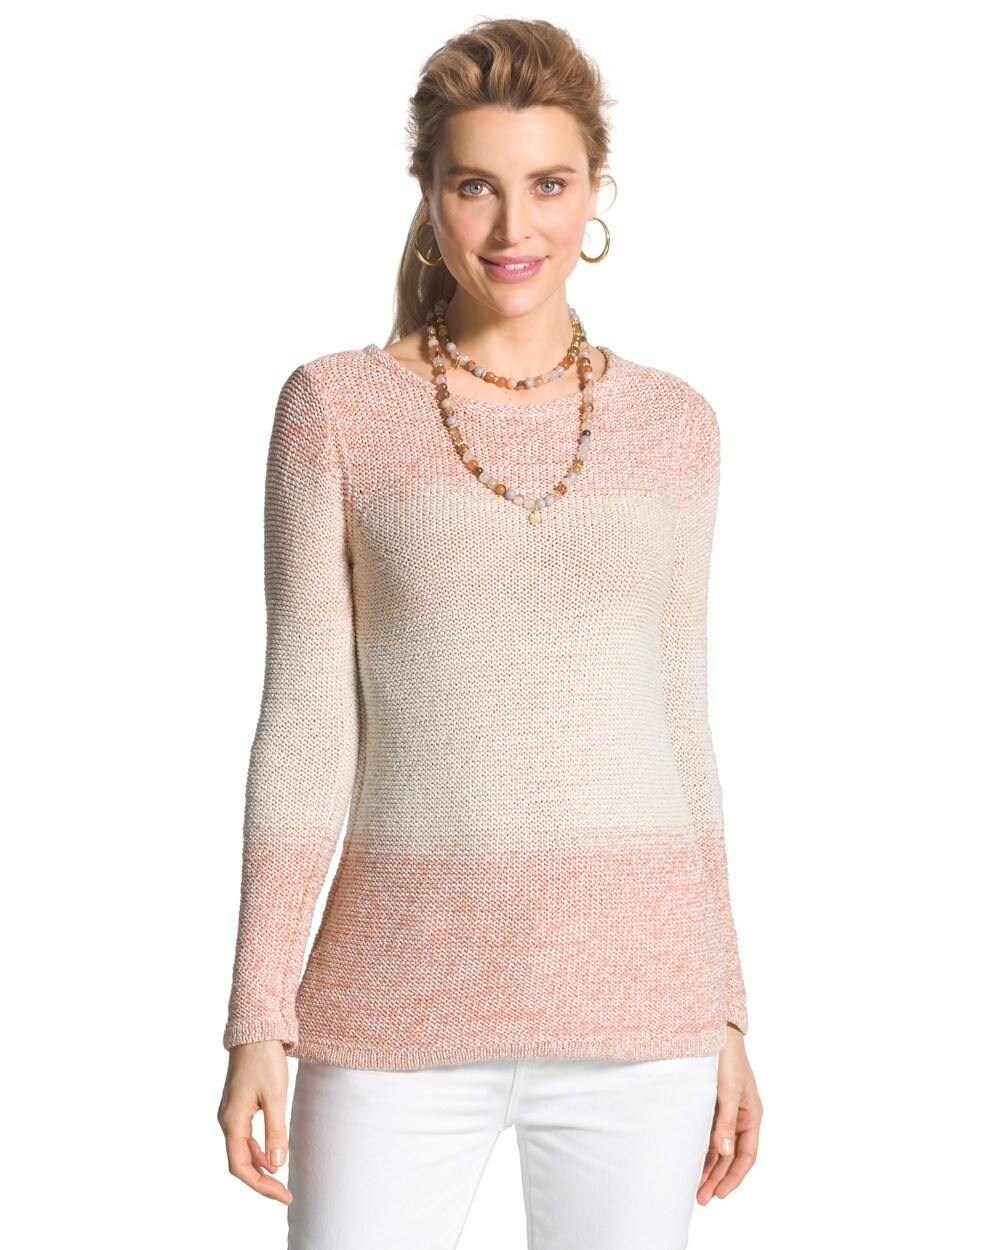 Space-Dye Jewel Pullover in Gingered Peach